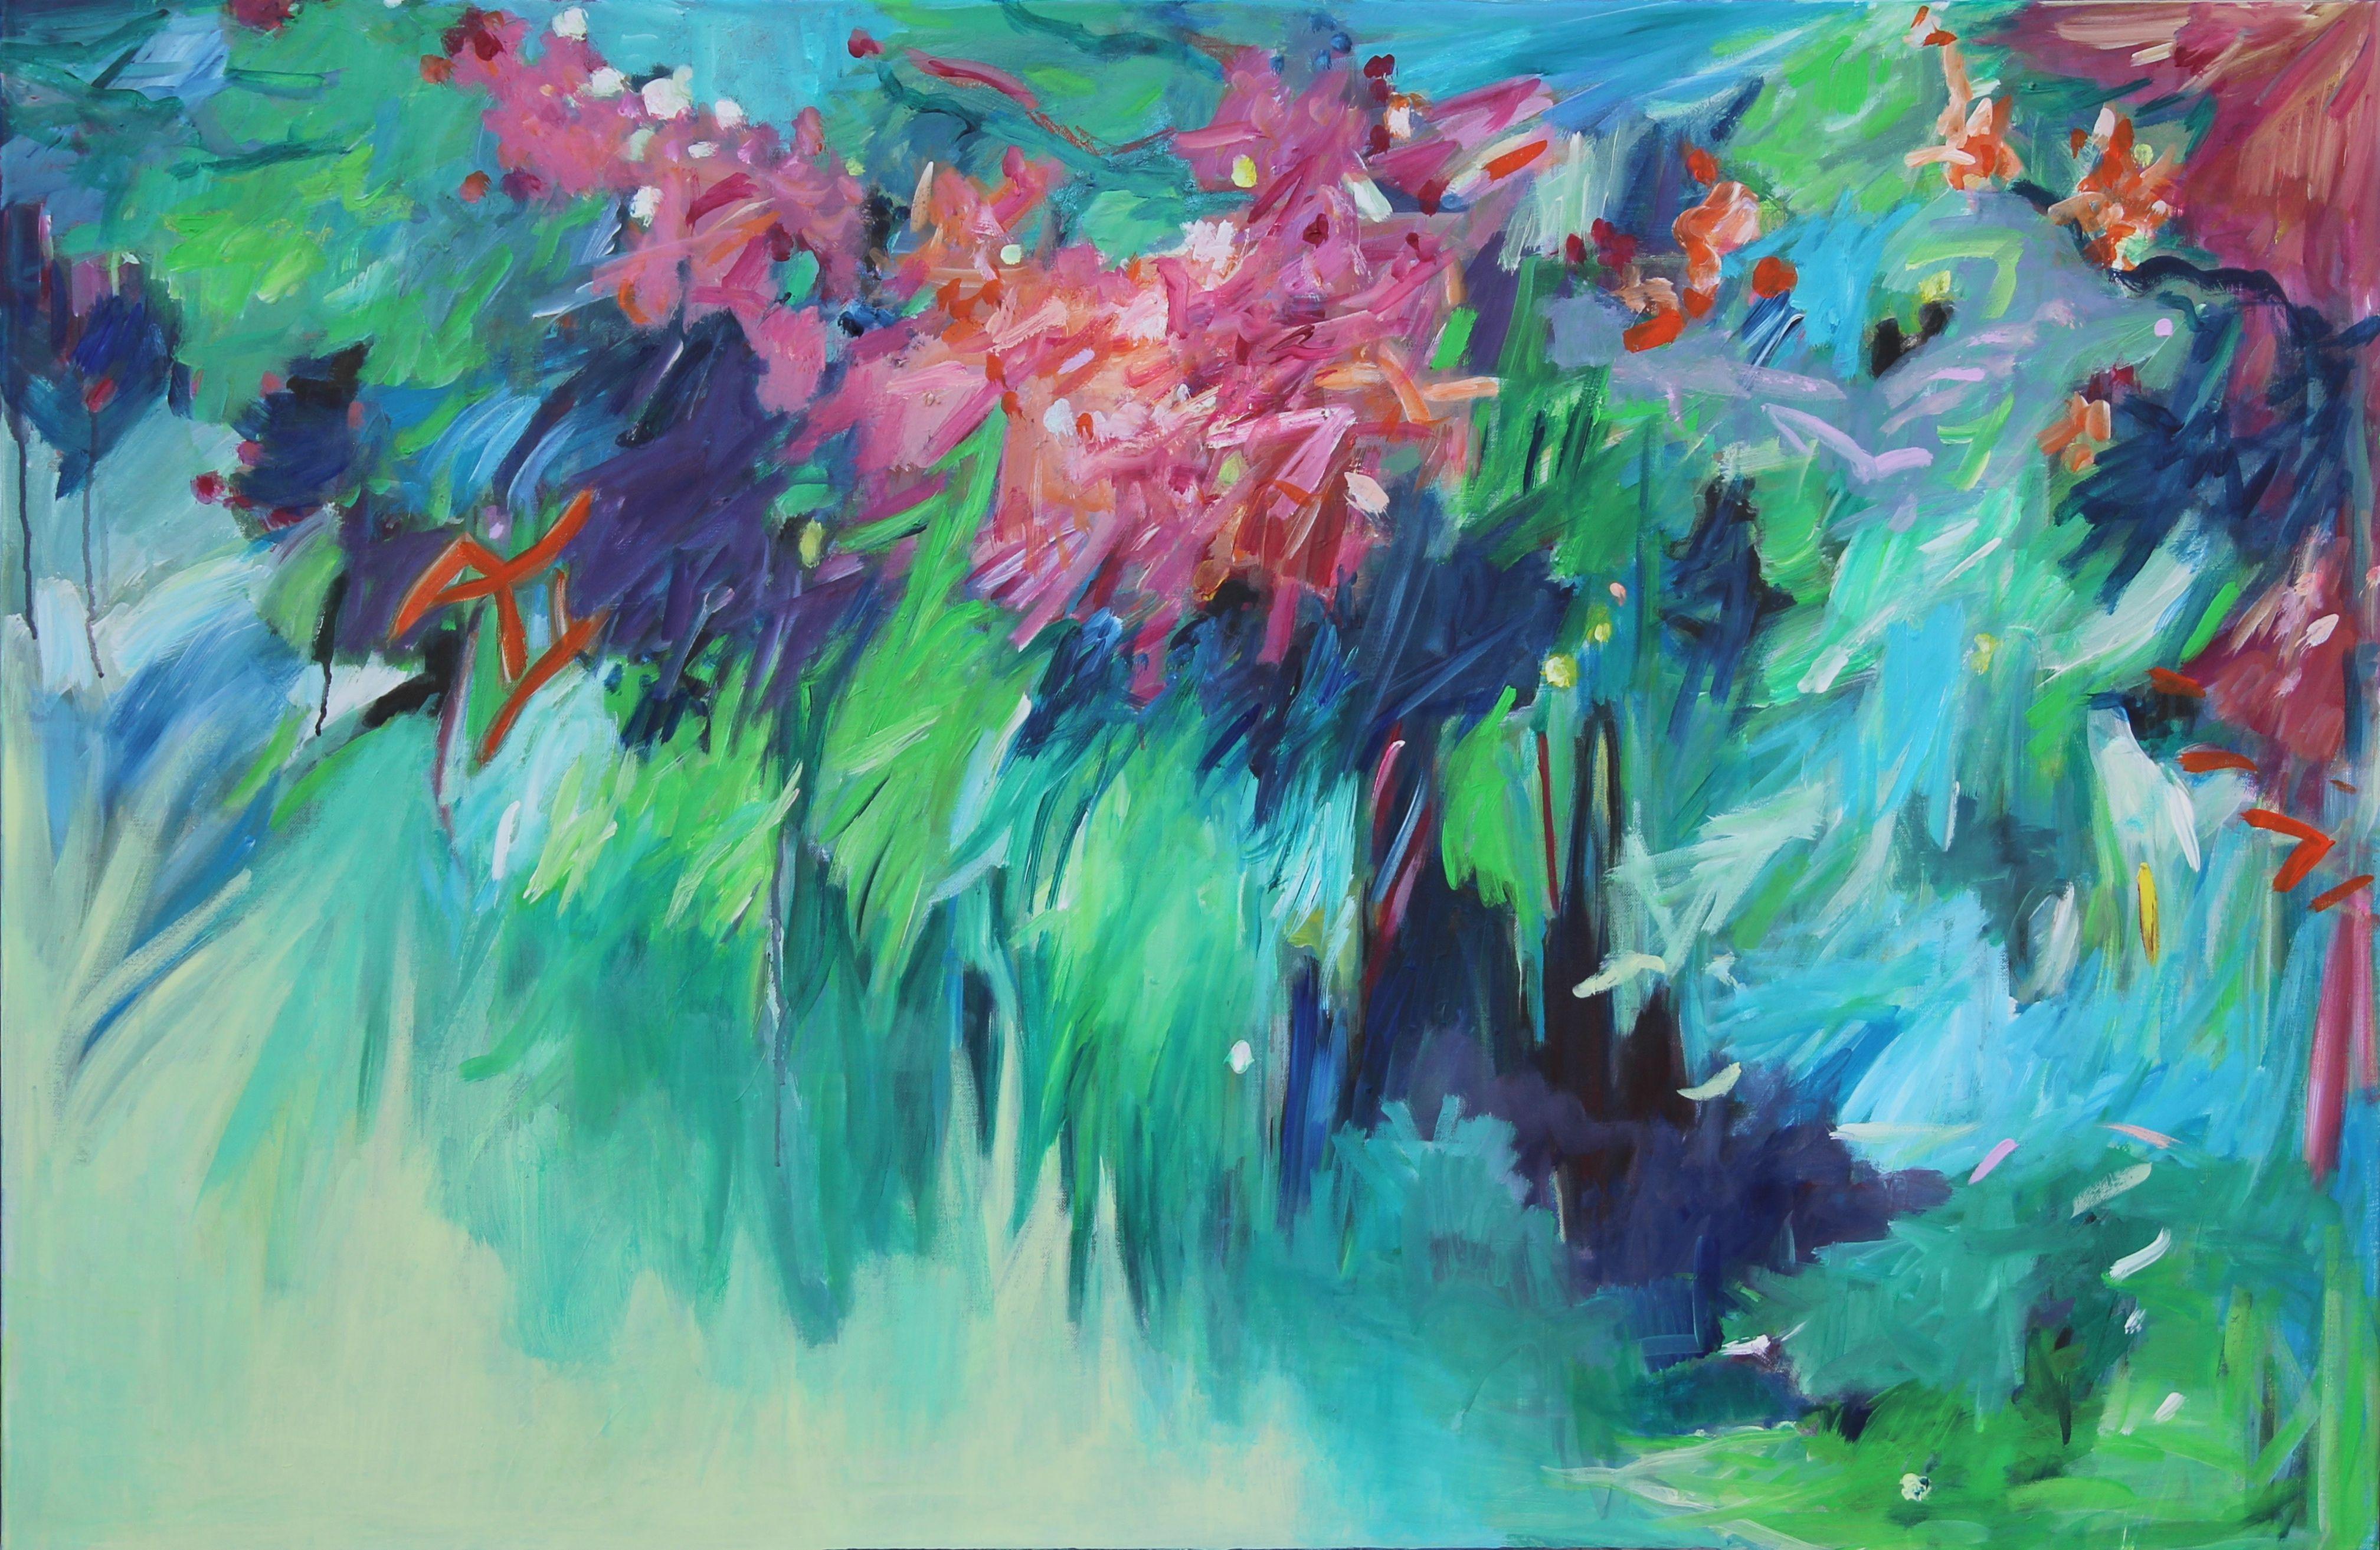 Statement piece of bright and bold colors. This painting is about overhanging lush flowers and blossoms. It is   painted in an impulsive and gestural way. The background is in soft colors which gives the painting depth. It has a sunny vibe and